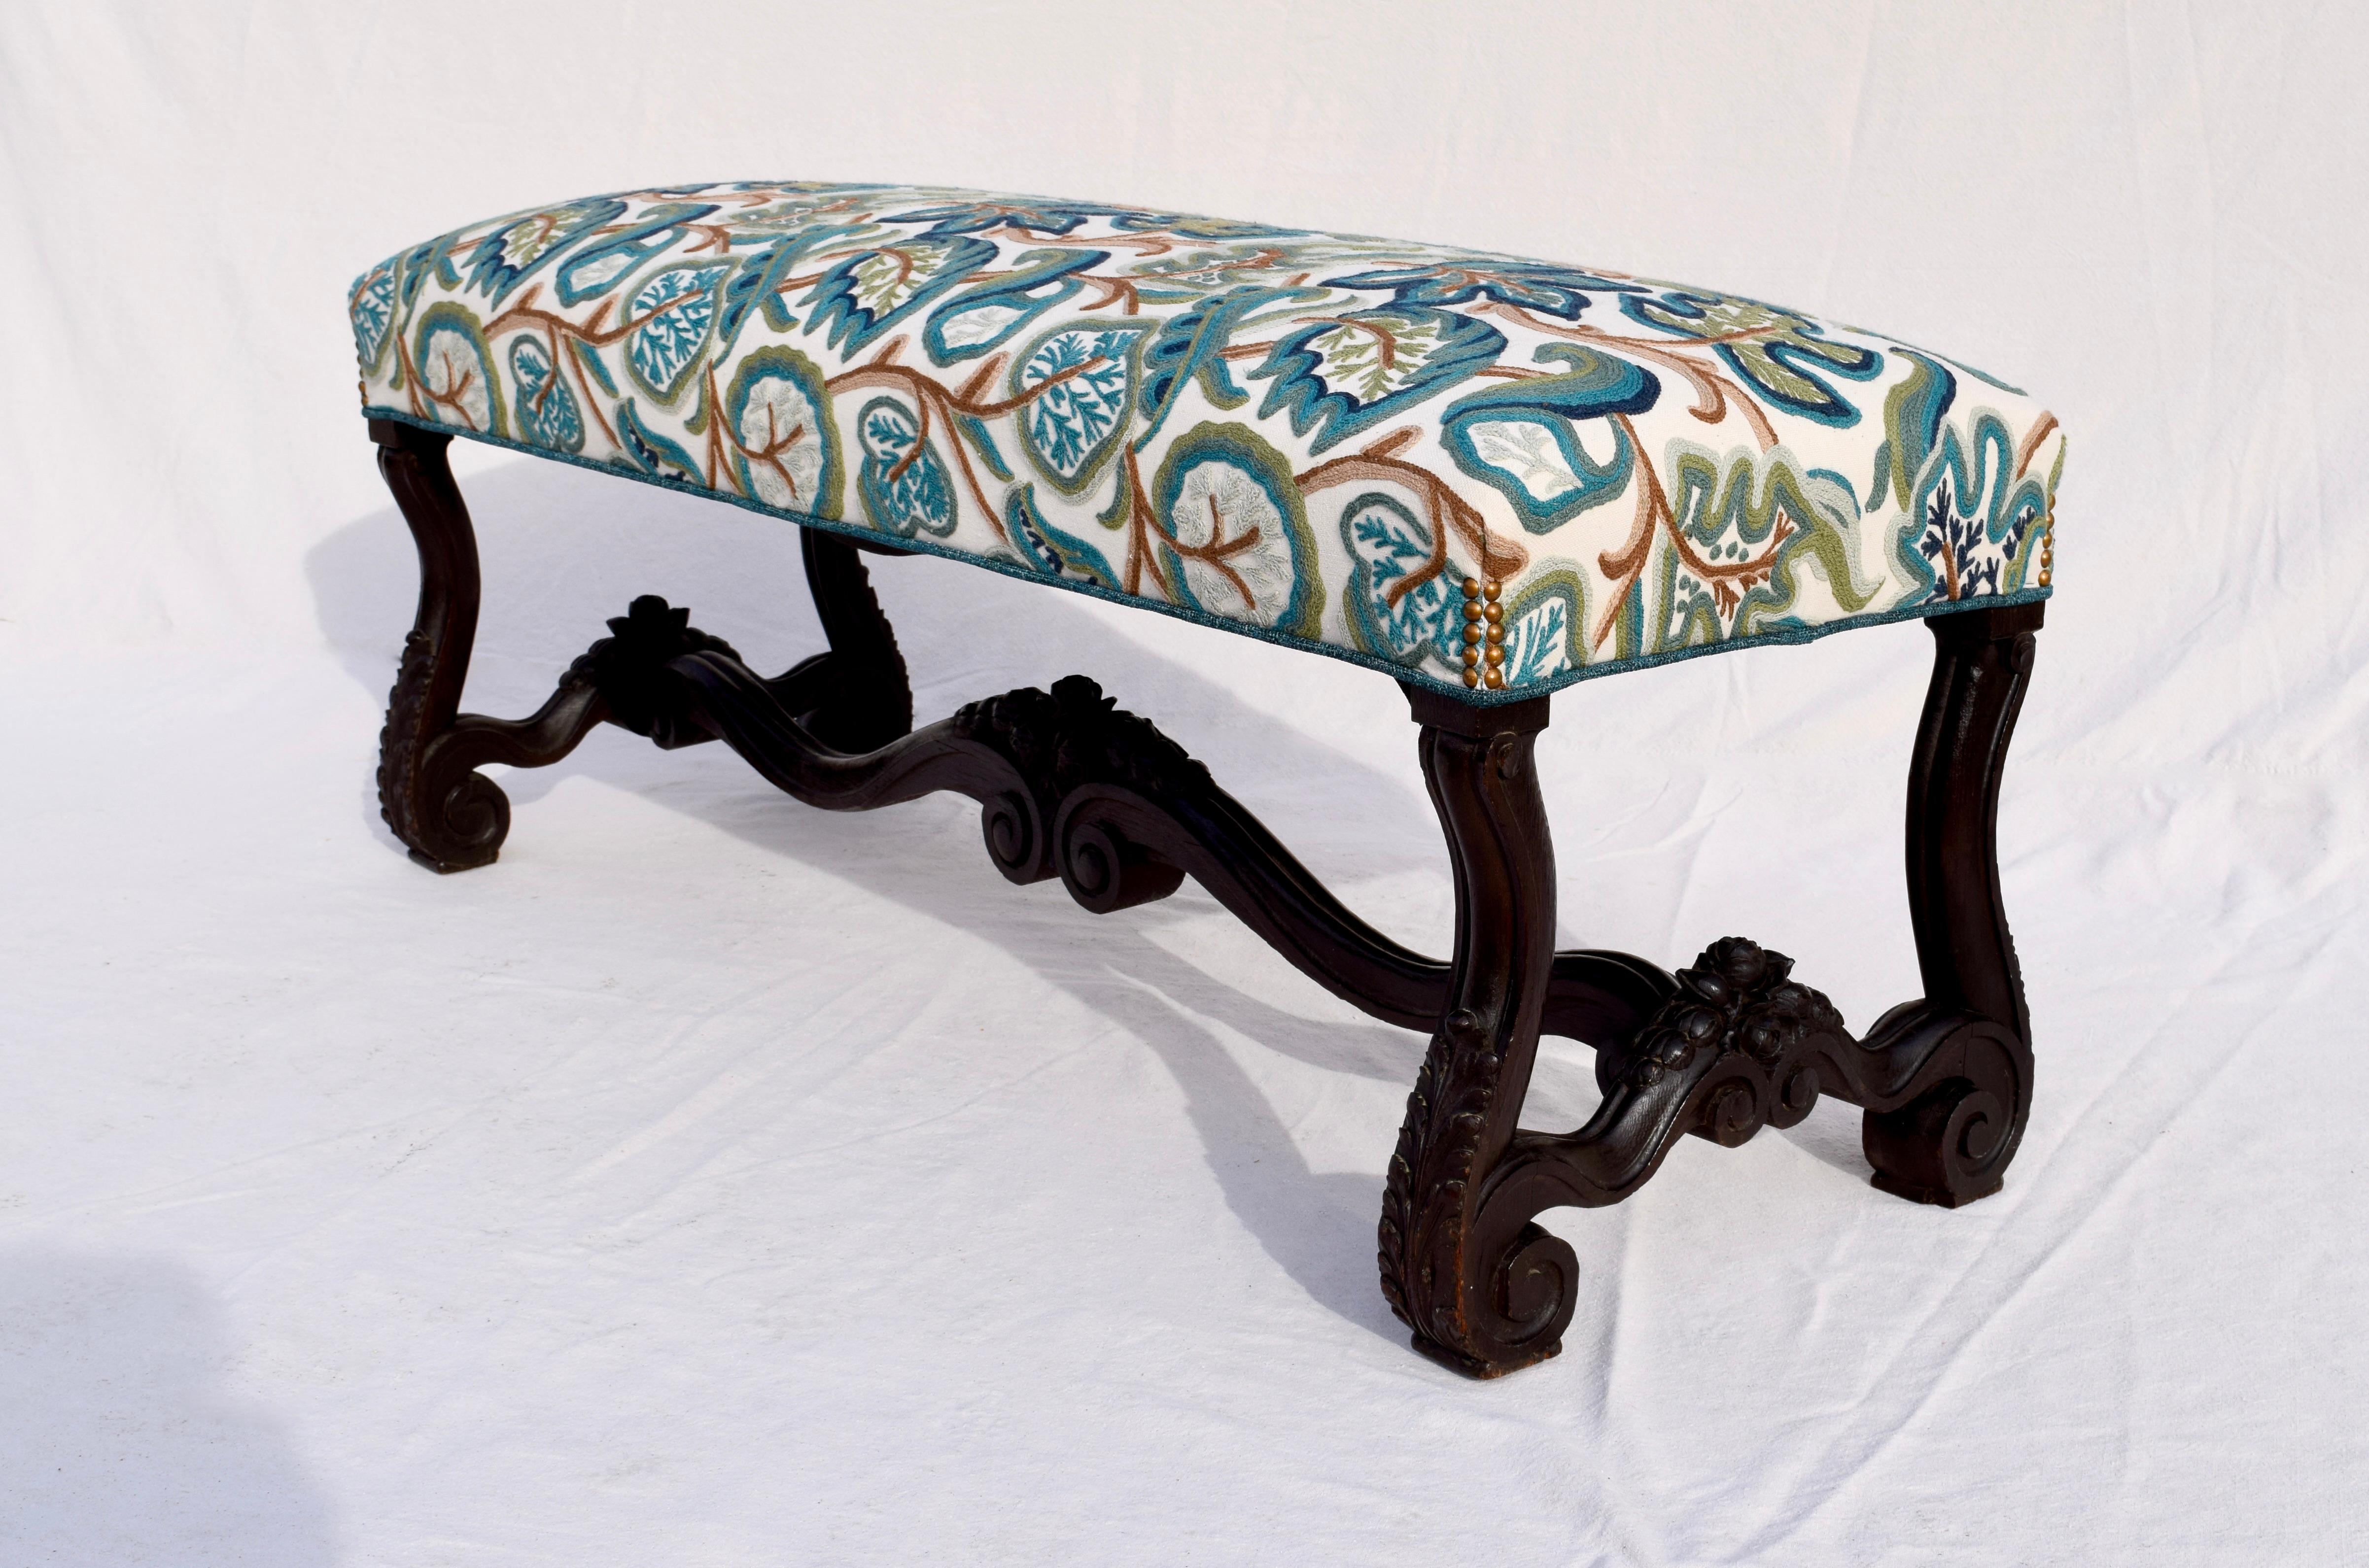 Hand-Carved Mid-19th Century Antique American Empire Upholstered Scroll Form Bench